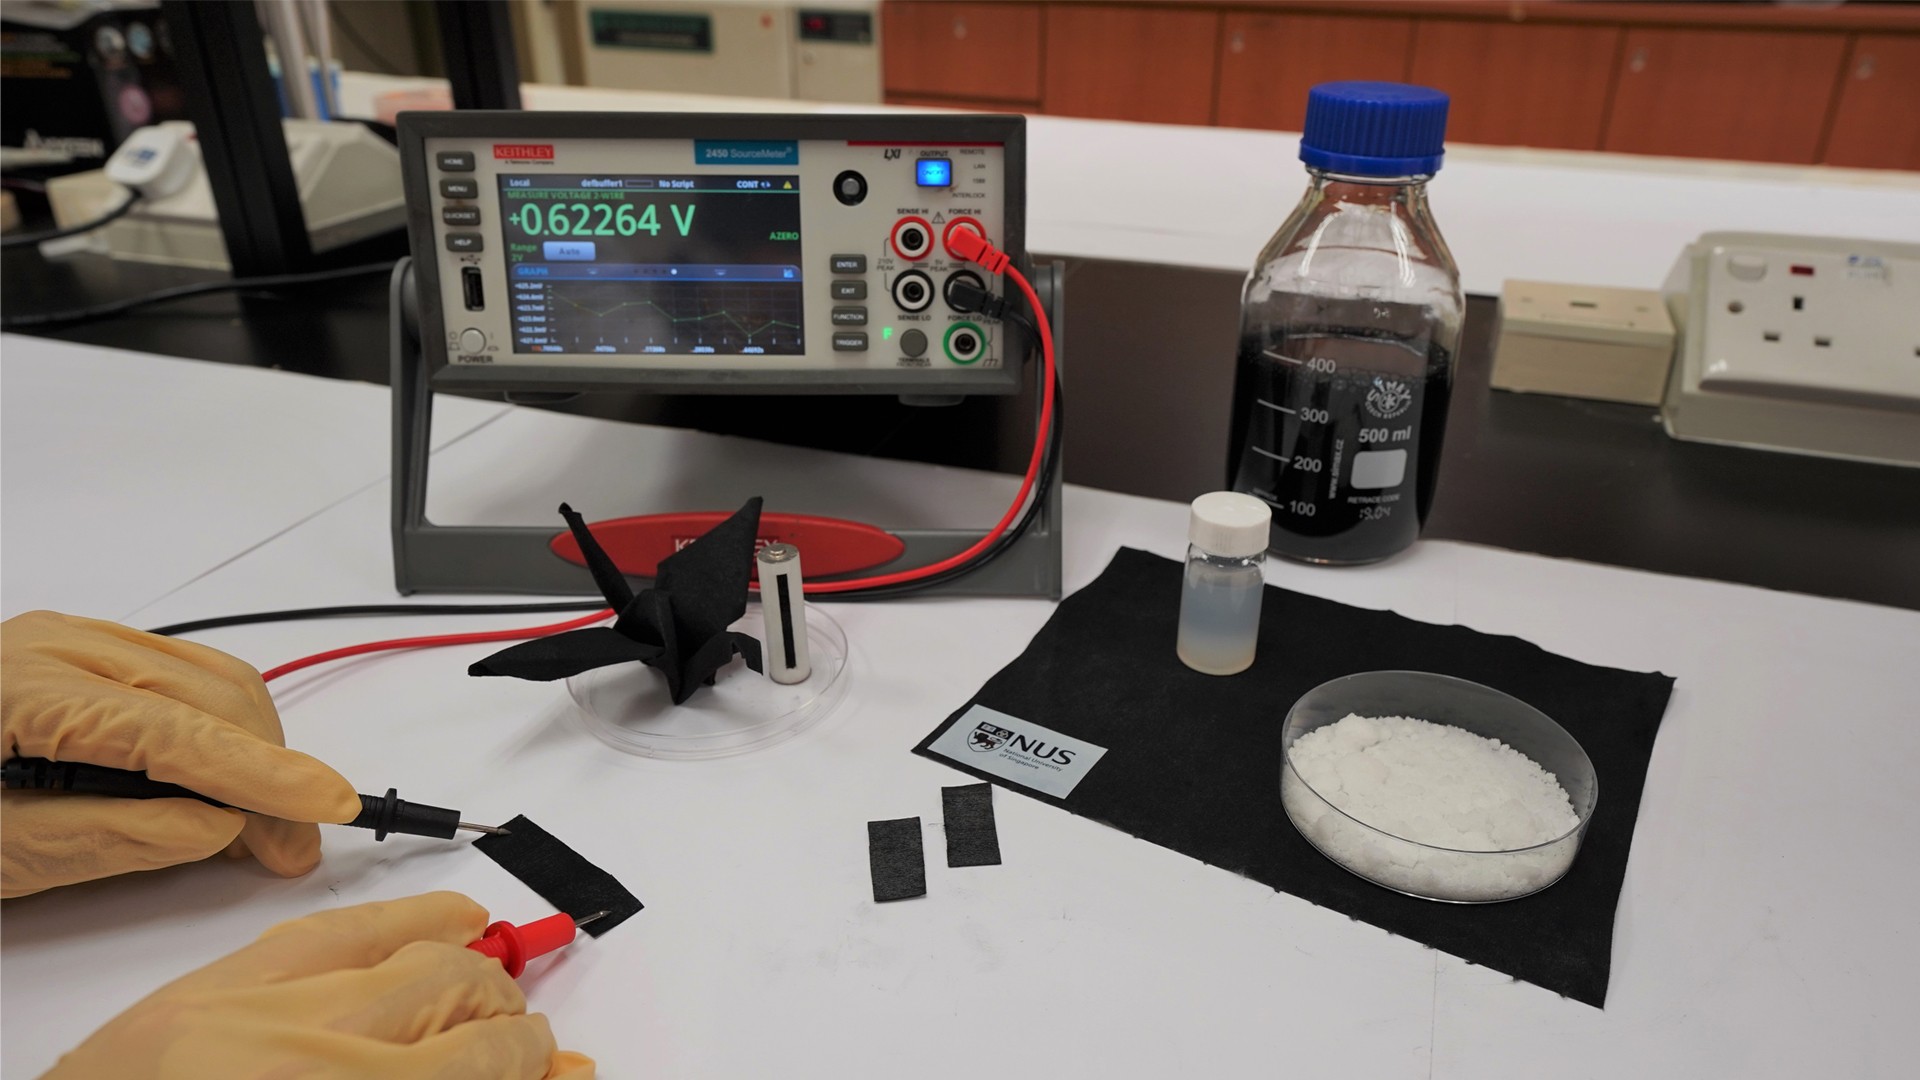 moisture-driven electricity generation device in the lab